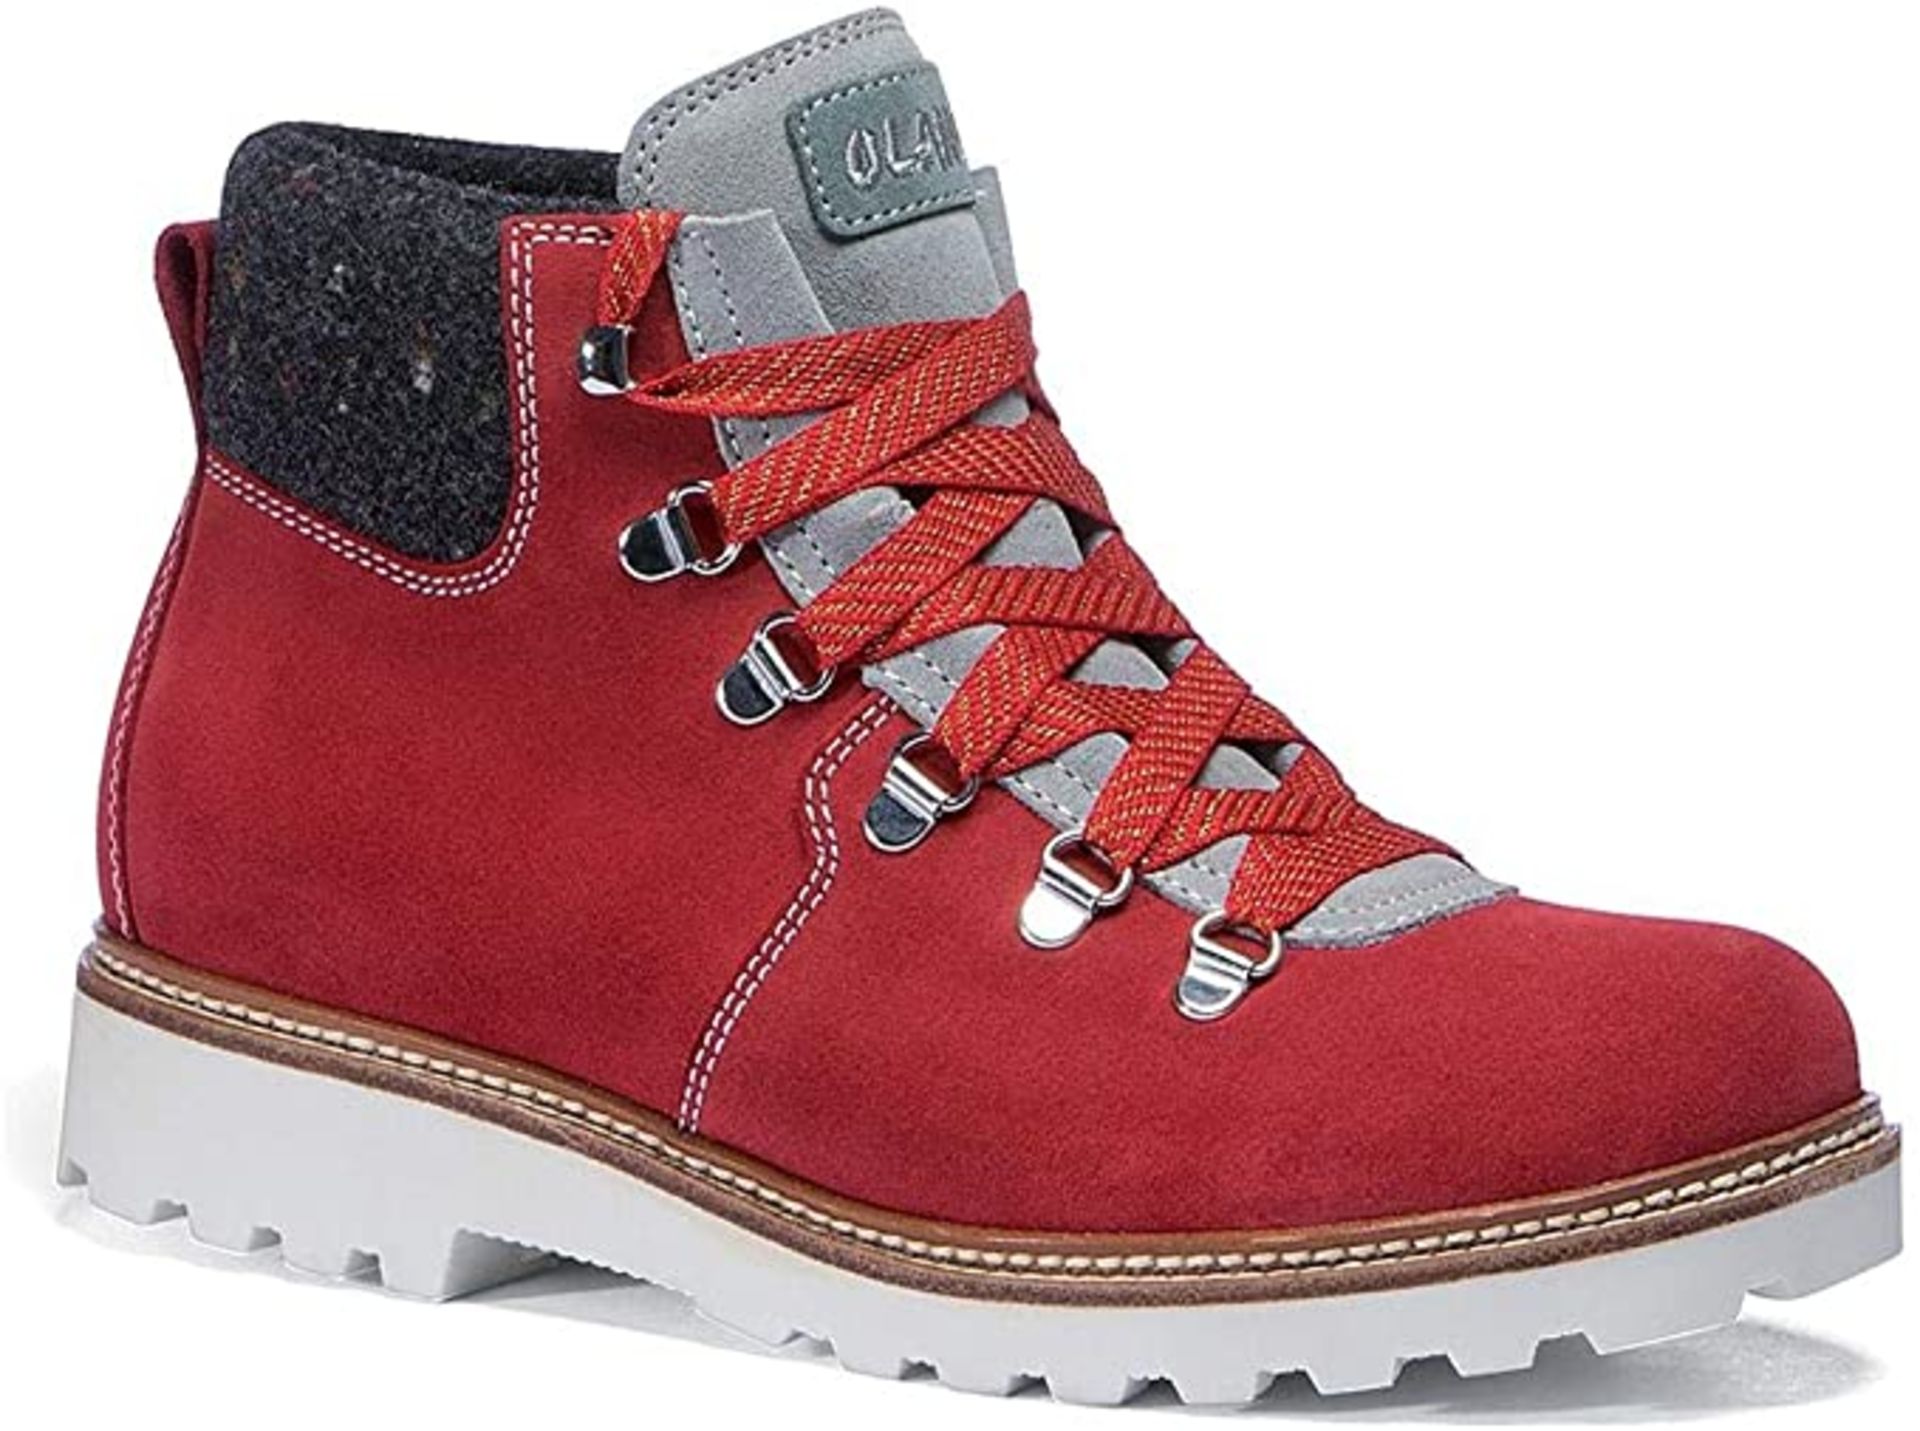 1 x Pair of Designer Olang Merano BTX 815 Rosso Women's Winter Boots - Euro Size 39 - Brand New - Image 3 of 4